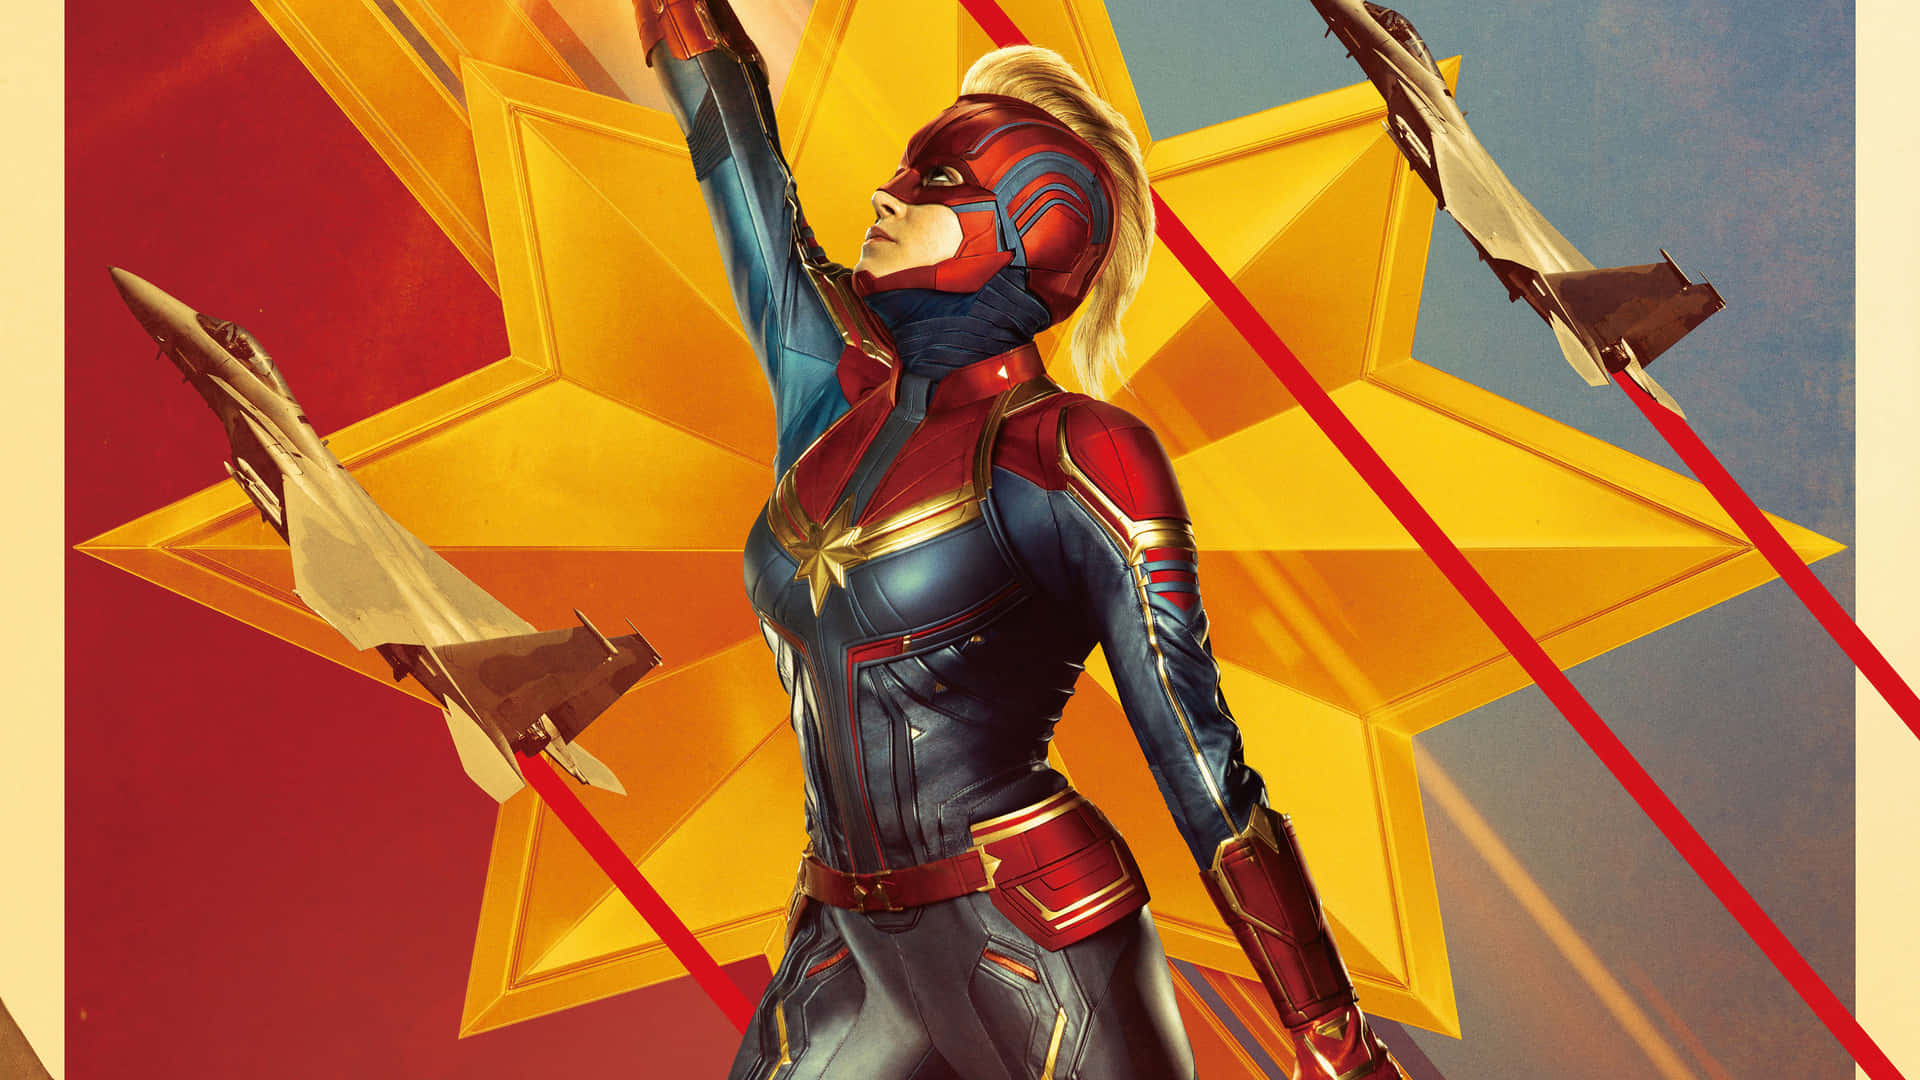 Get Ready to Save the World with the Captain Marvel Ipad Wallpaper